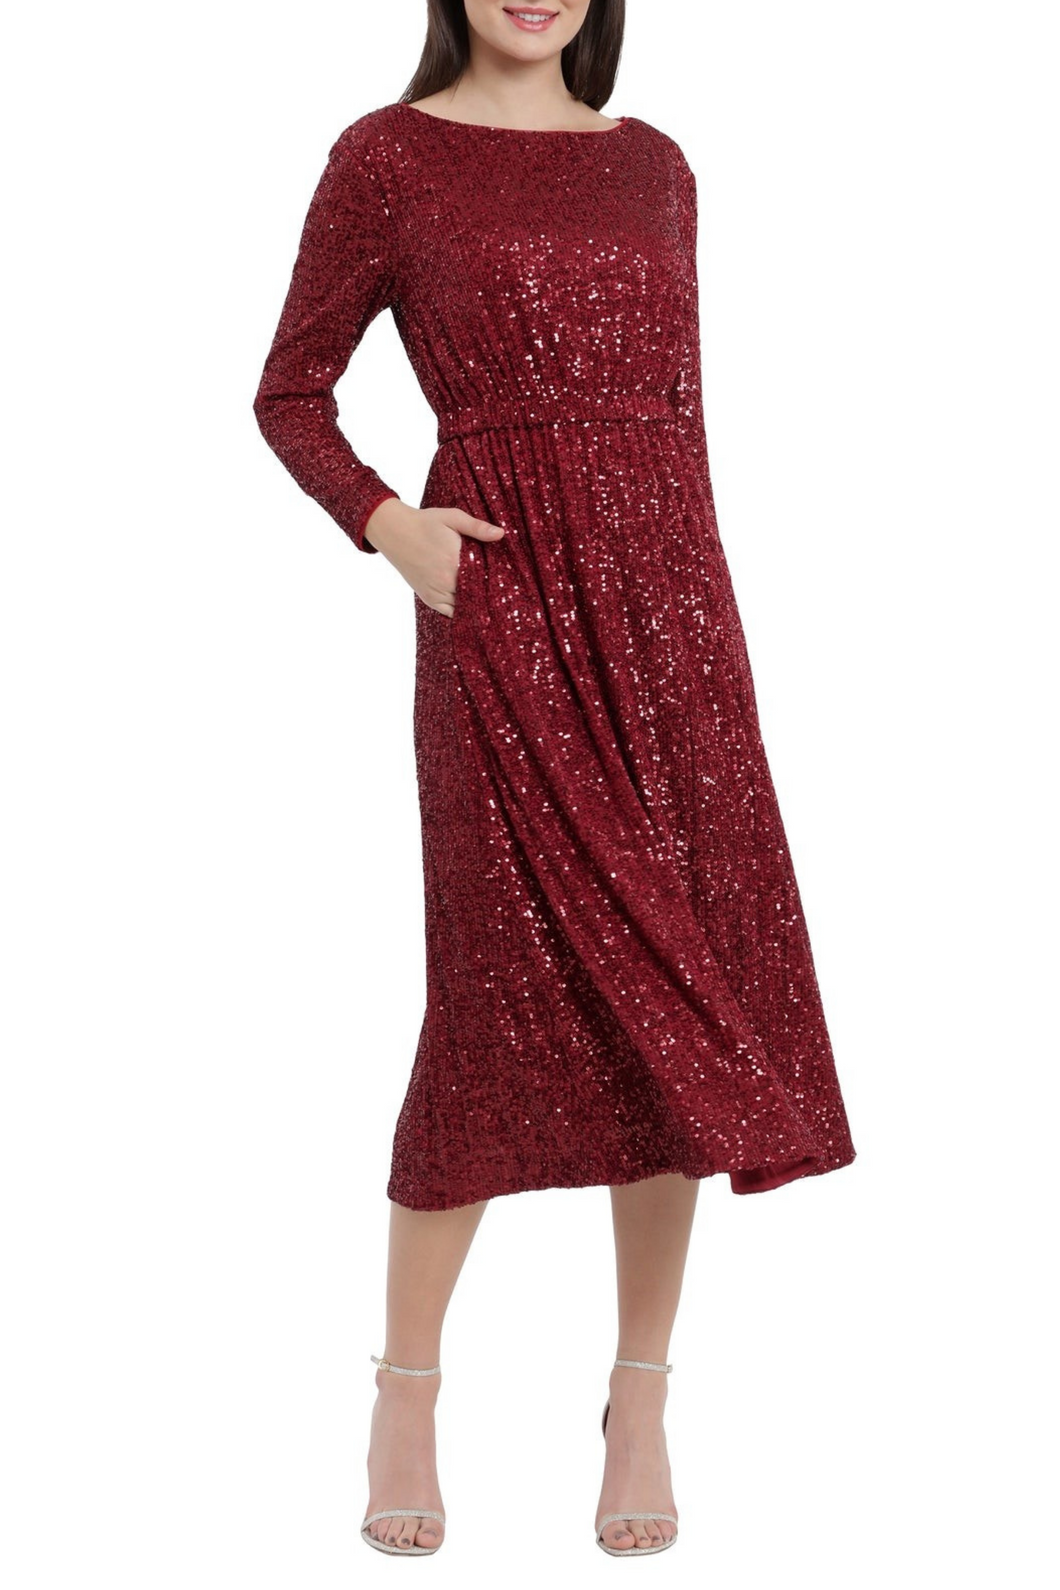 Maggy London Sequin Cherry Red Party Dress Only Size 2 Remaining Cocktail